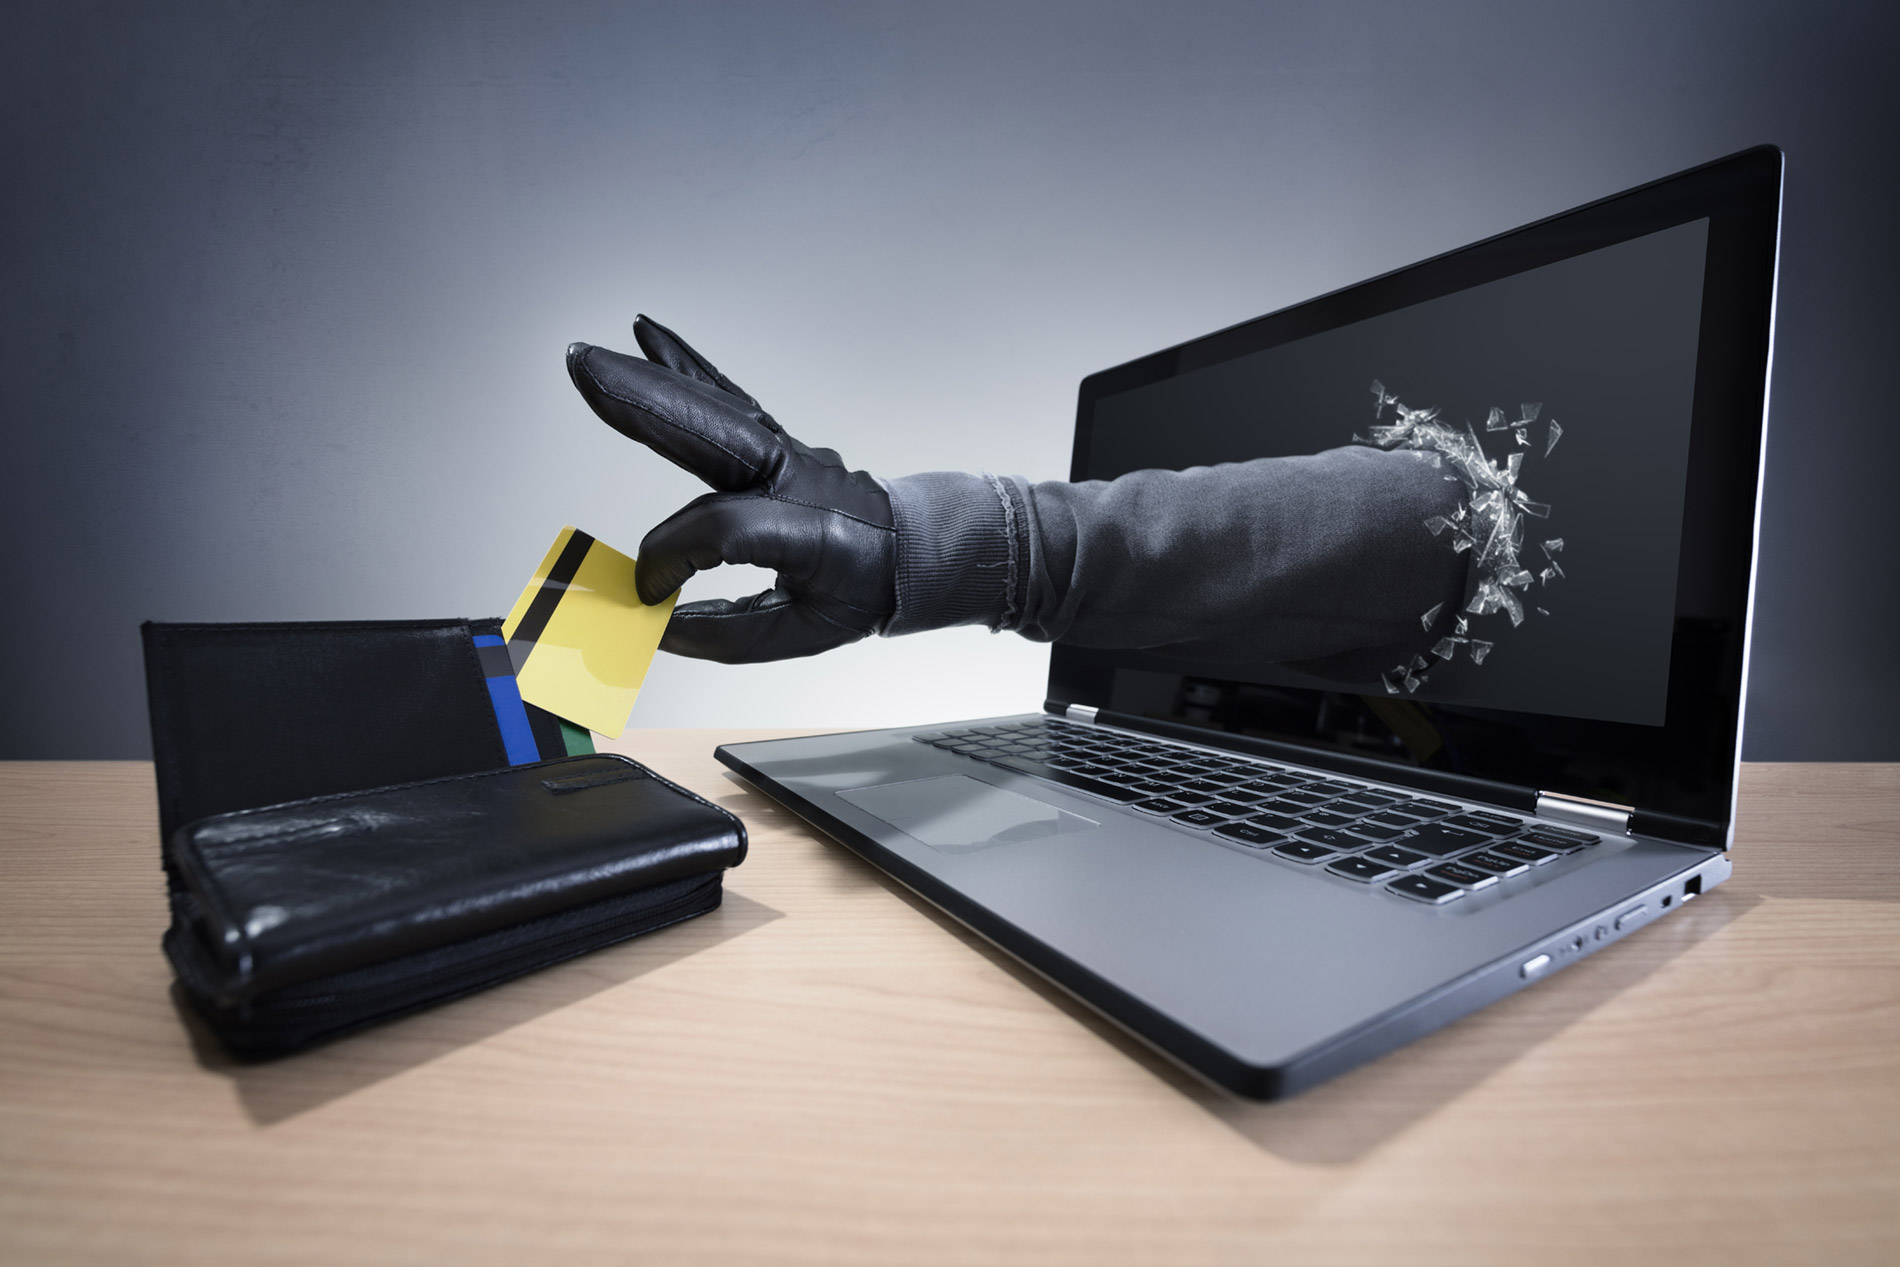 Why Care About Identity Theft?